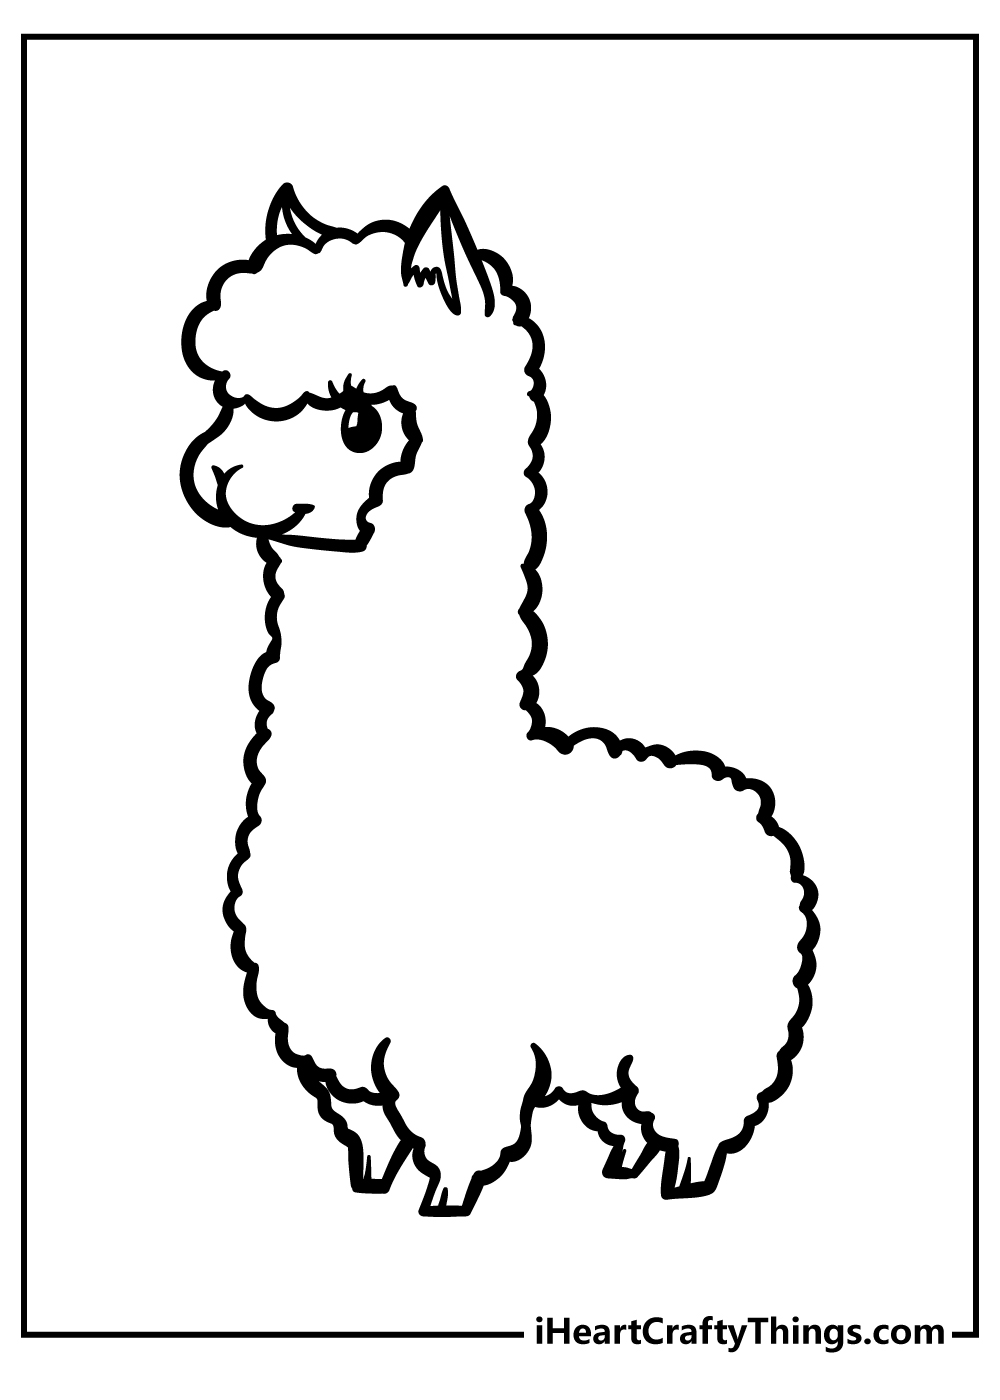 llama Coloring Pages for adults free printable